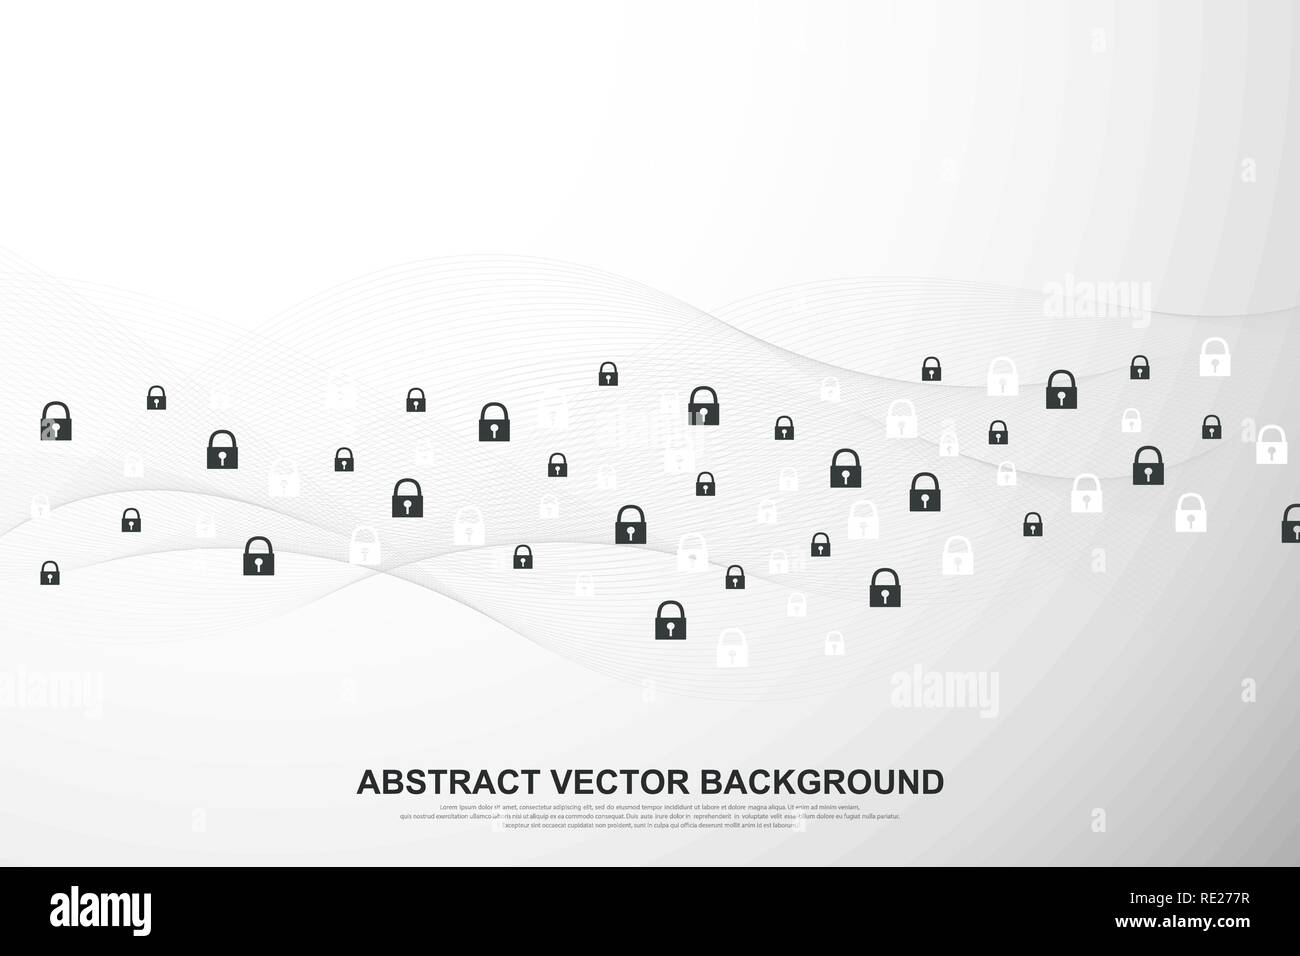 Global network connection background. Cyber security concept global business. Internet communication background. Technology graphic design. Vector illustration. Stock Vector